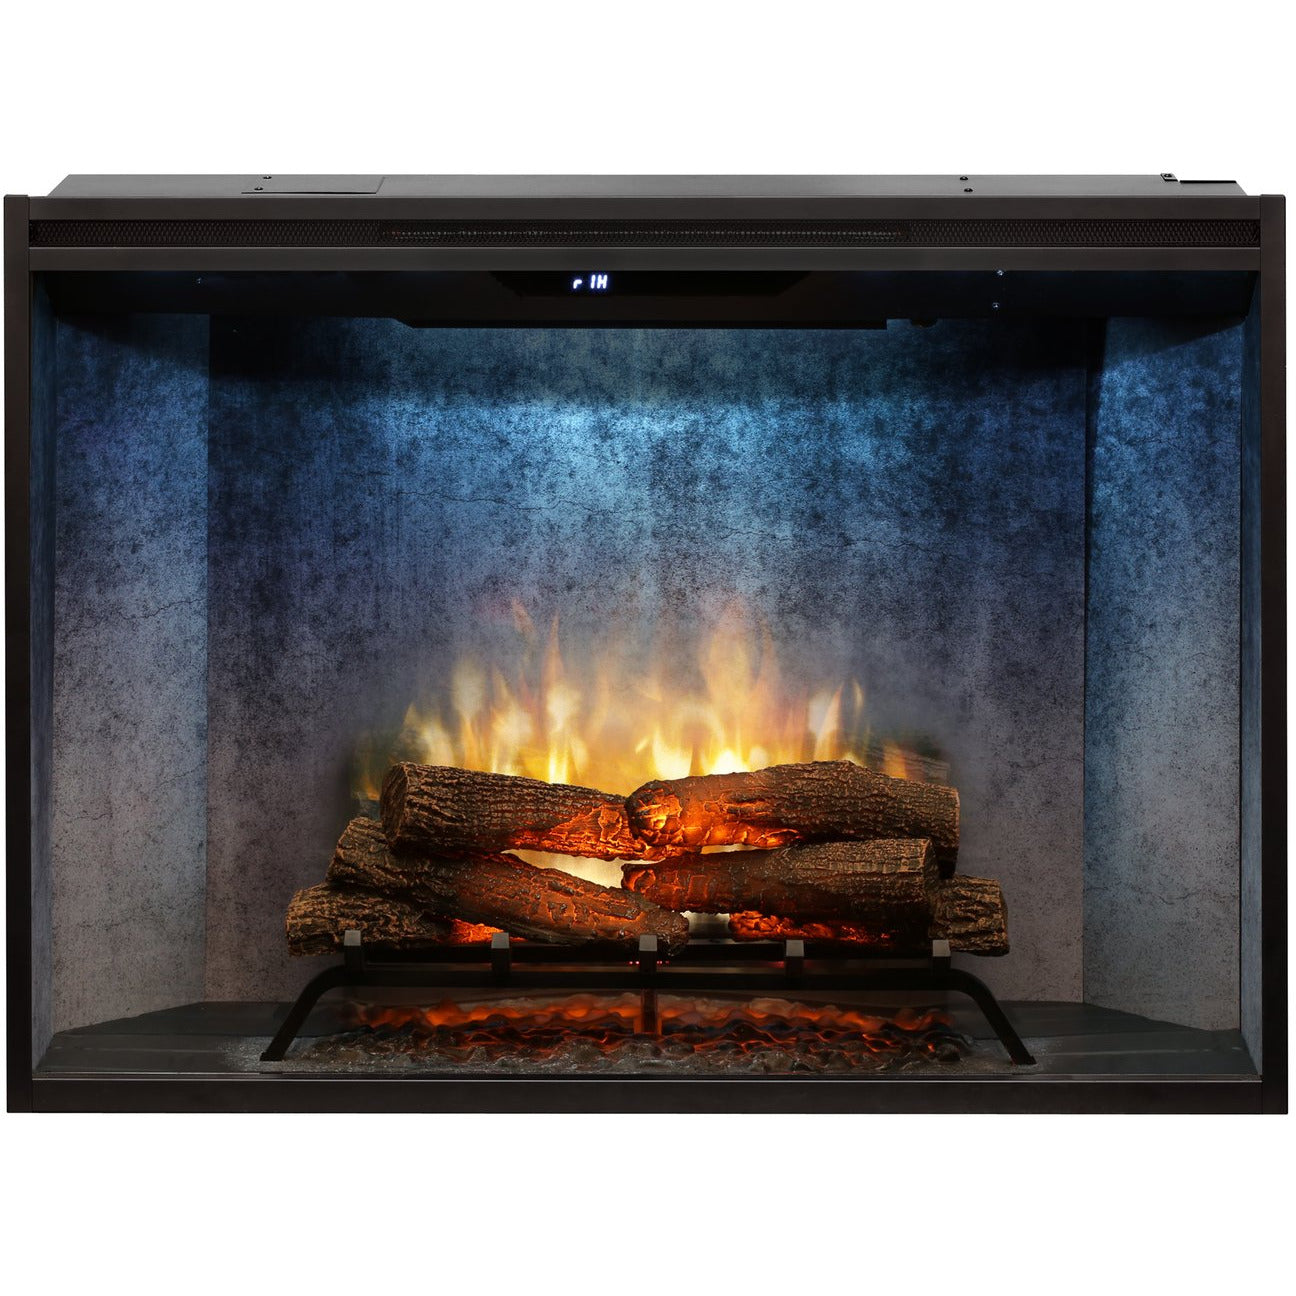 Dimplex 42" Revillusion Built-In Electric Firebox Weathered Concrete 500002411